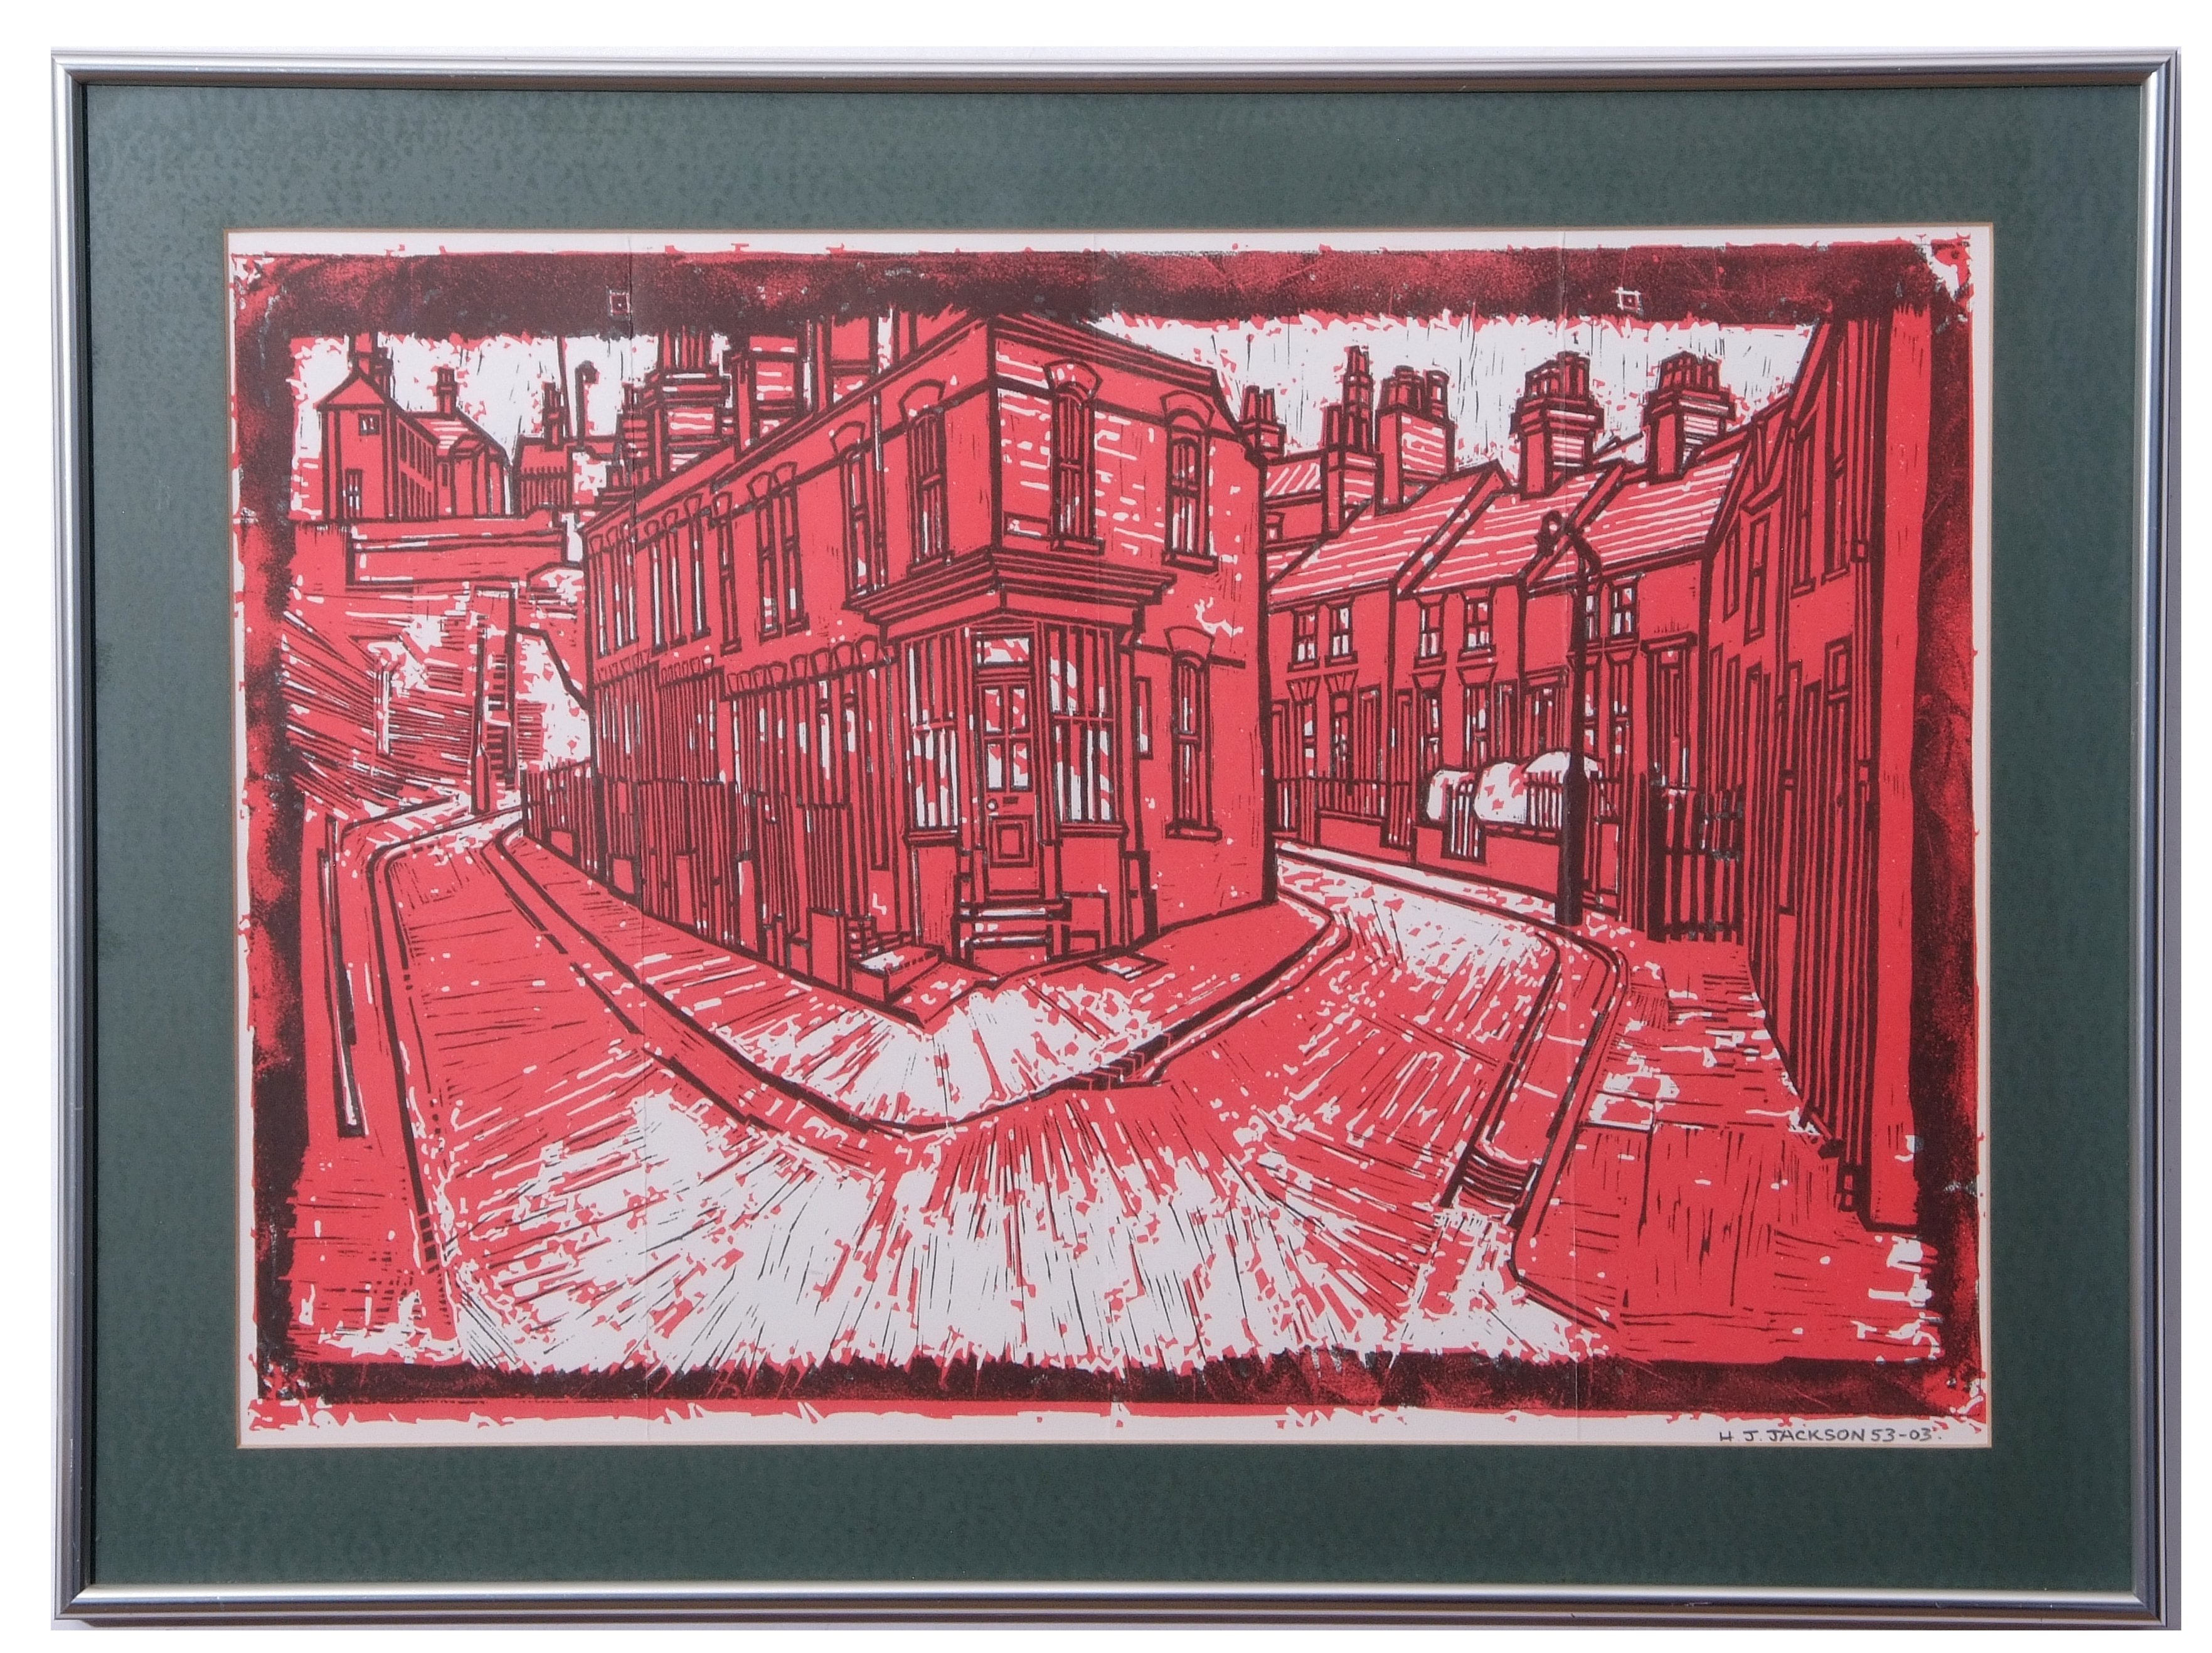 AR H John Jackson, ARE (born 1938 "Street scene" linocut, signed and dated 53-03 in pencil to